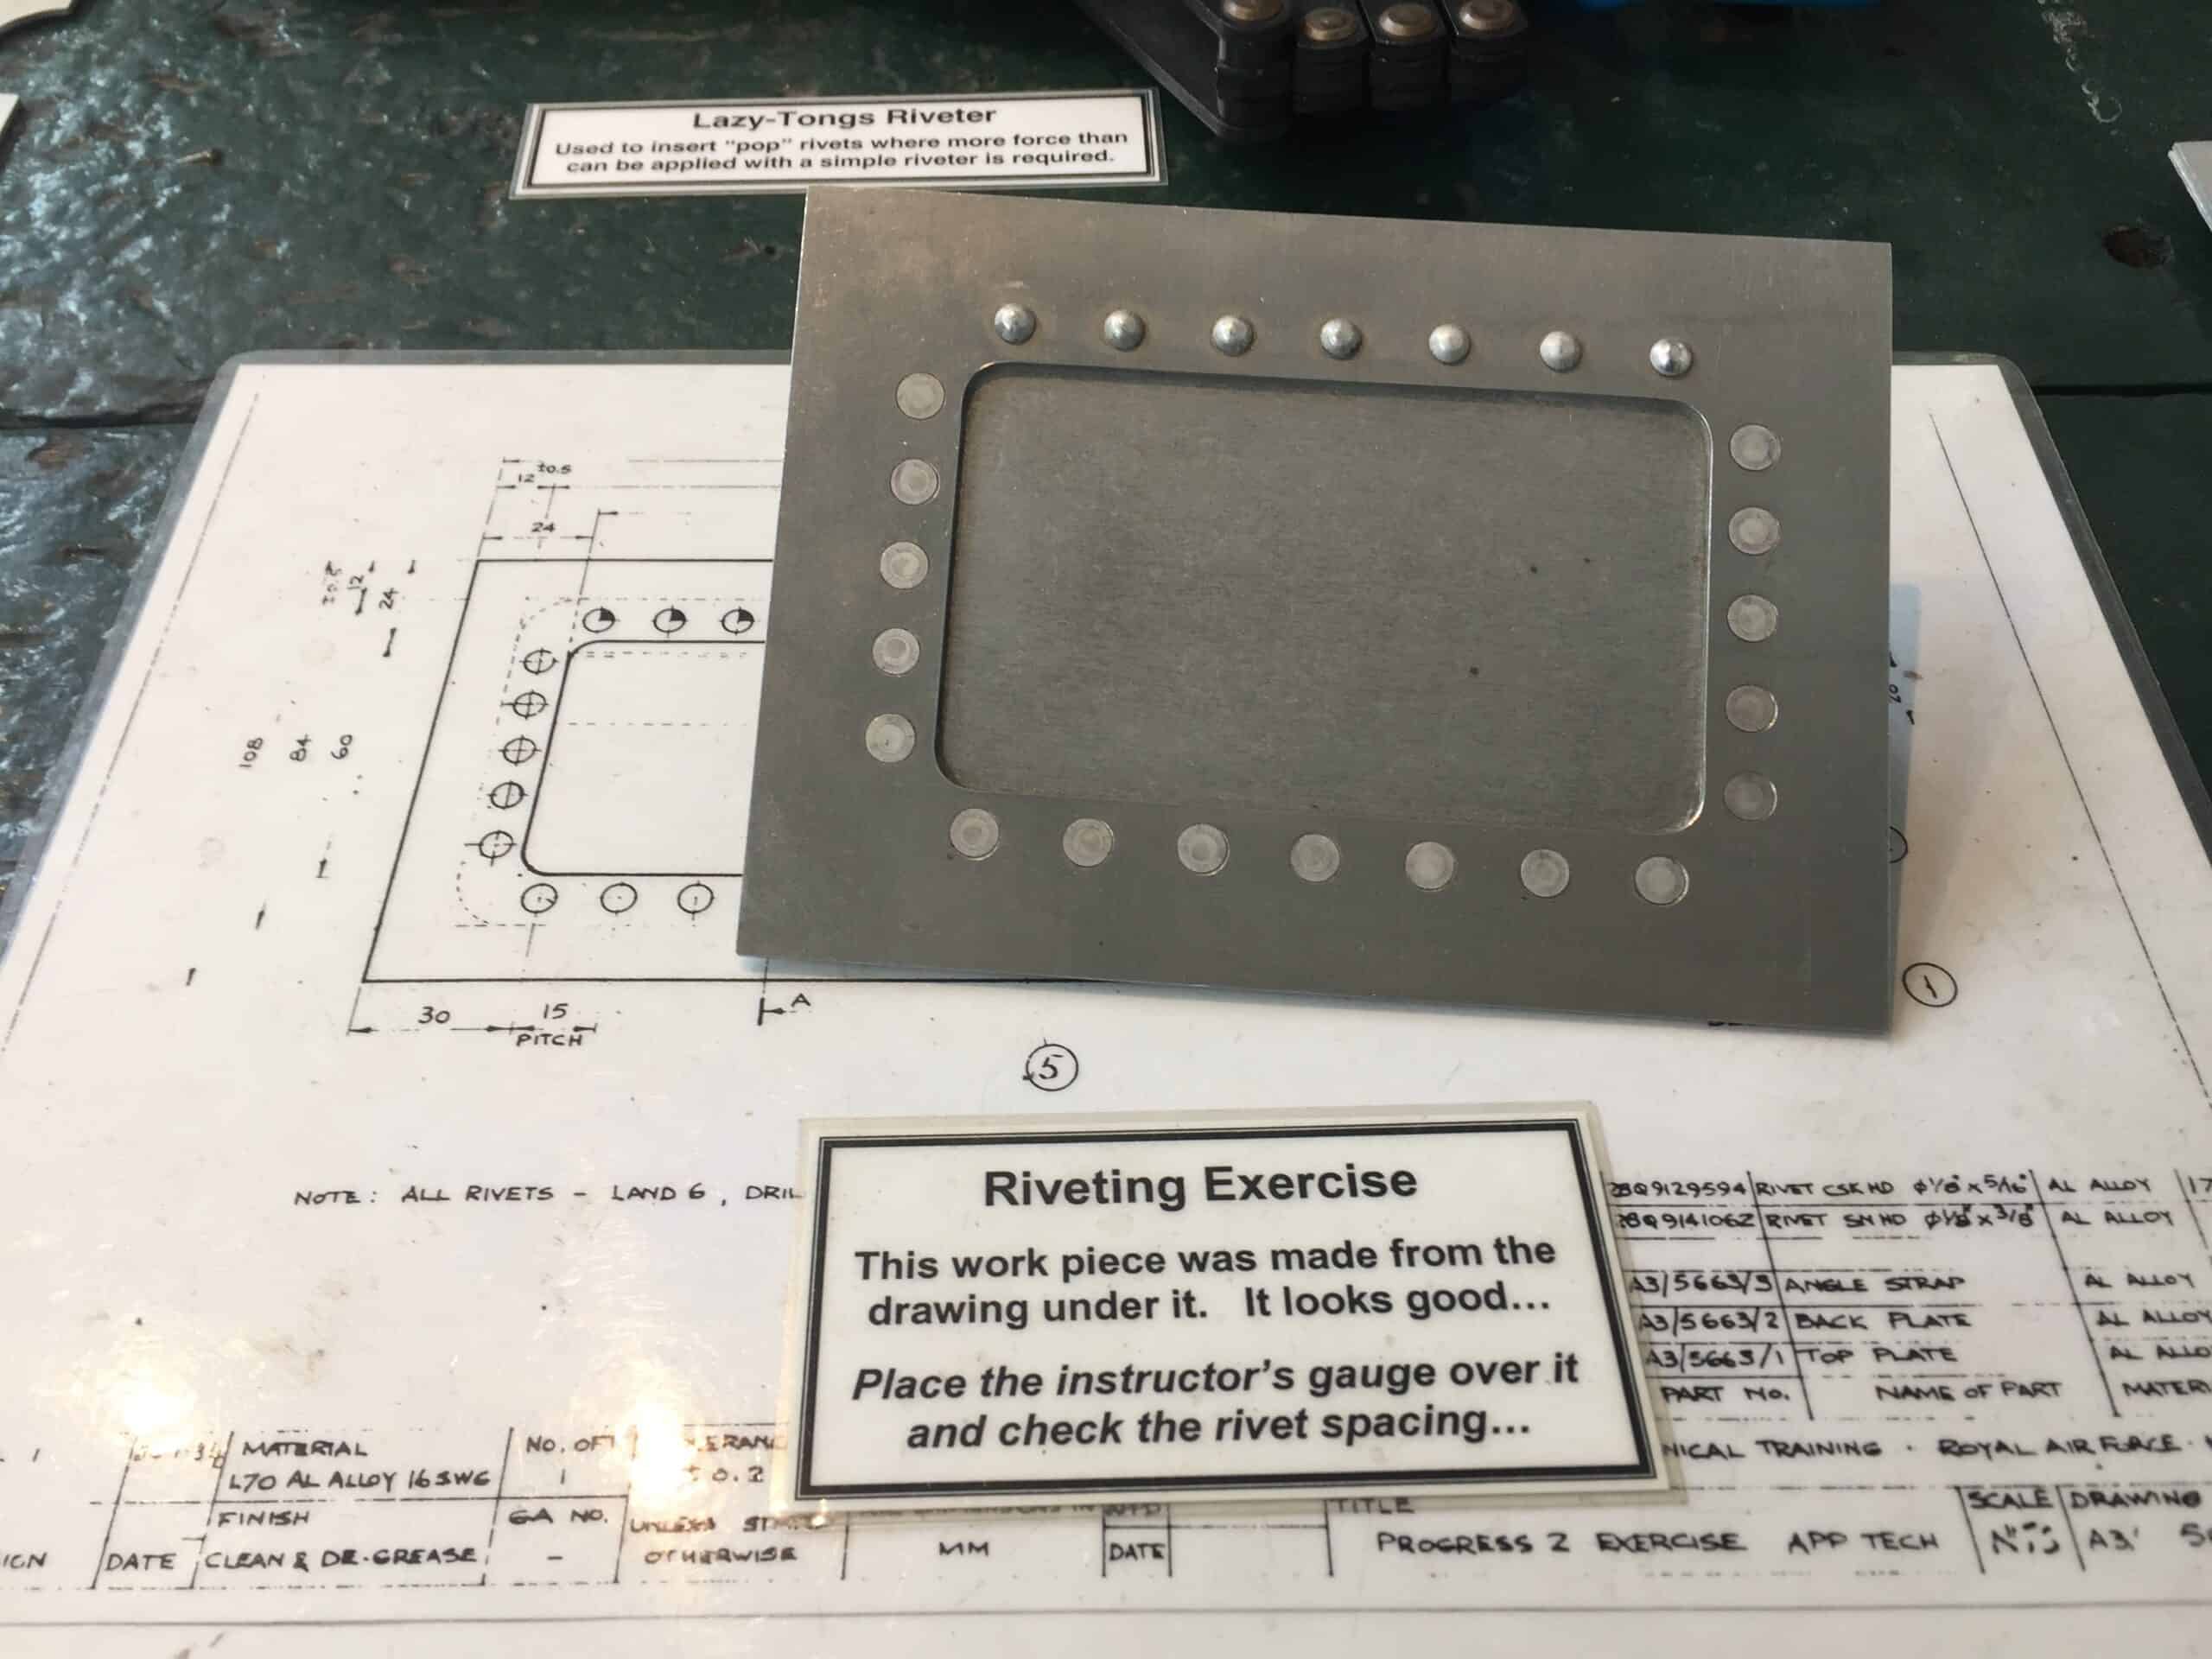 Riveting exercise example from the Trenchard Museum. This image shows a riveting item produced as a result of referencing a technical drawing.